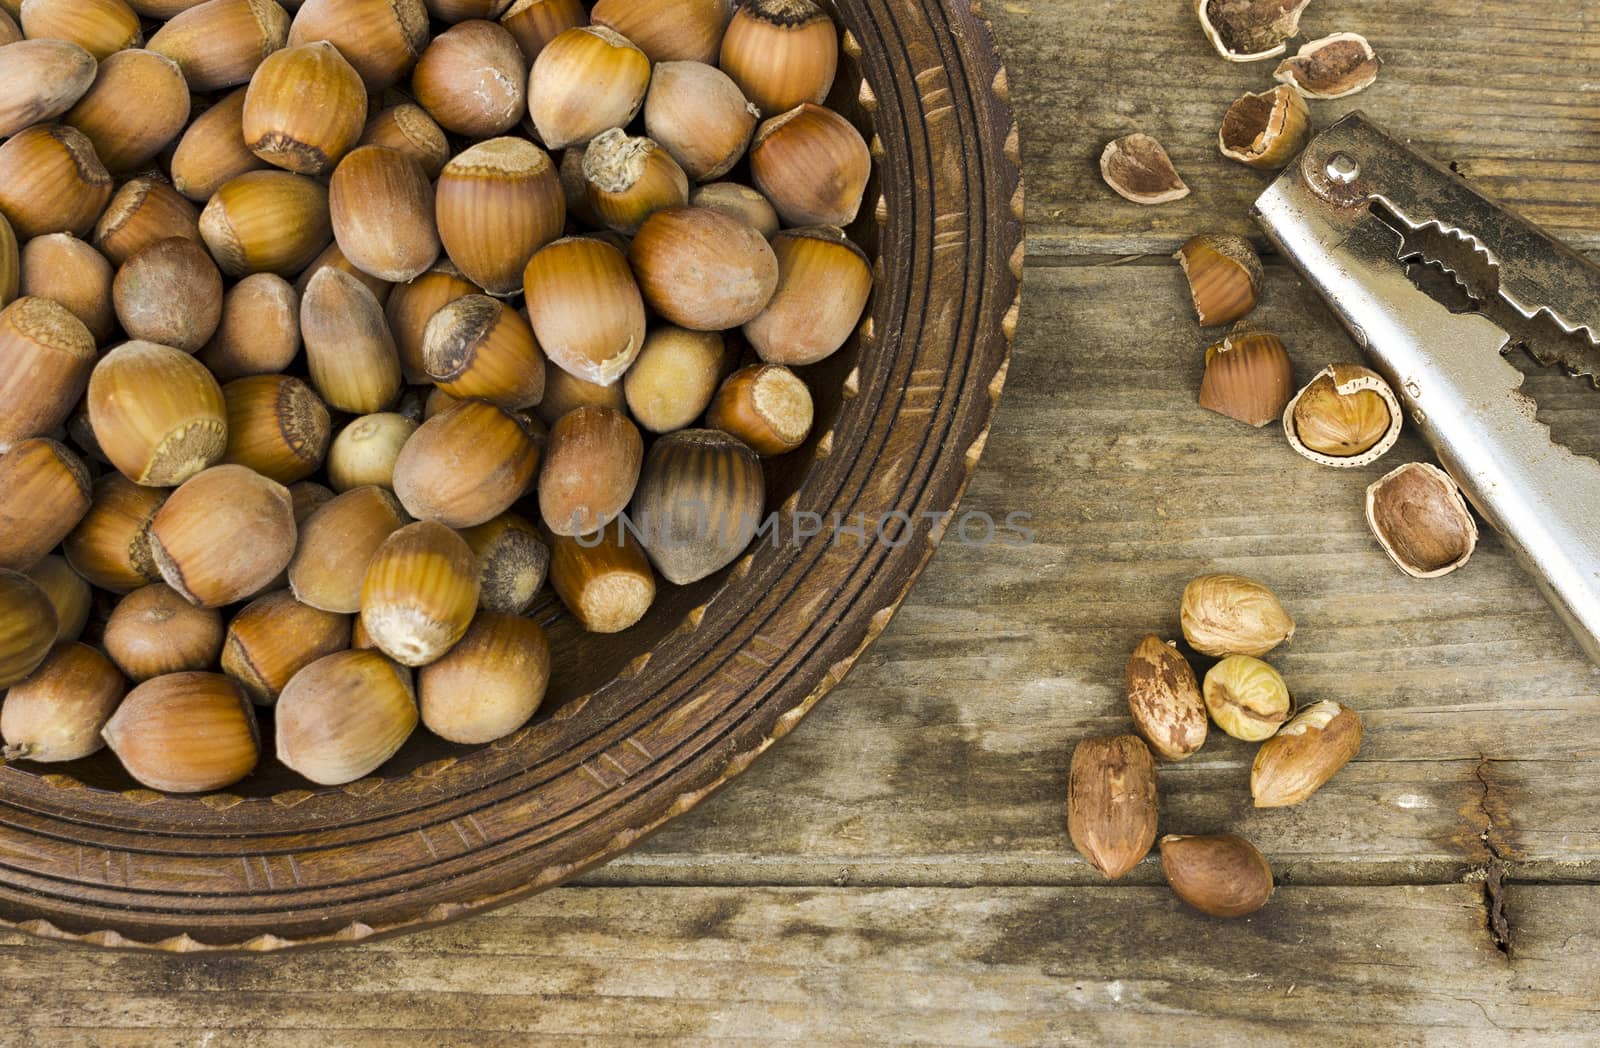 Hazelnut in a wooden bowl on rustic background